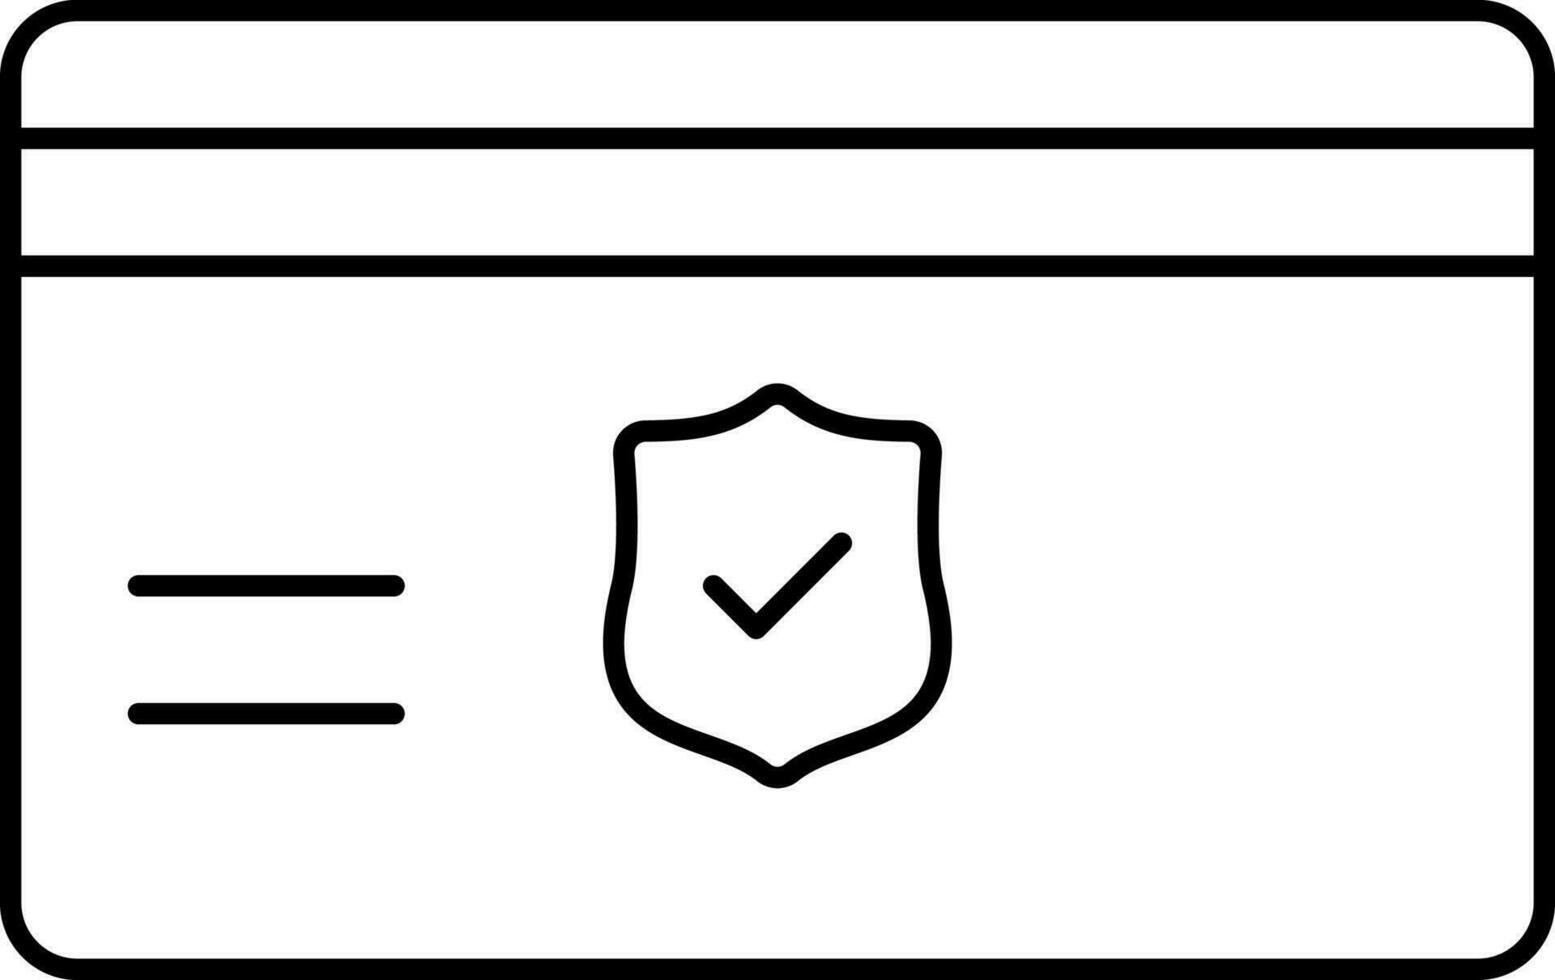 Check Card Security Icon In Line Art. vector